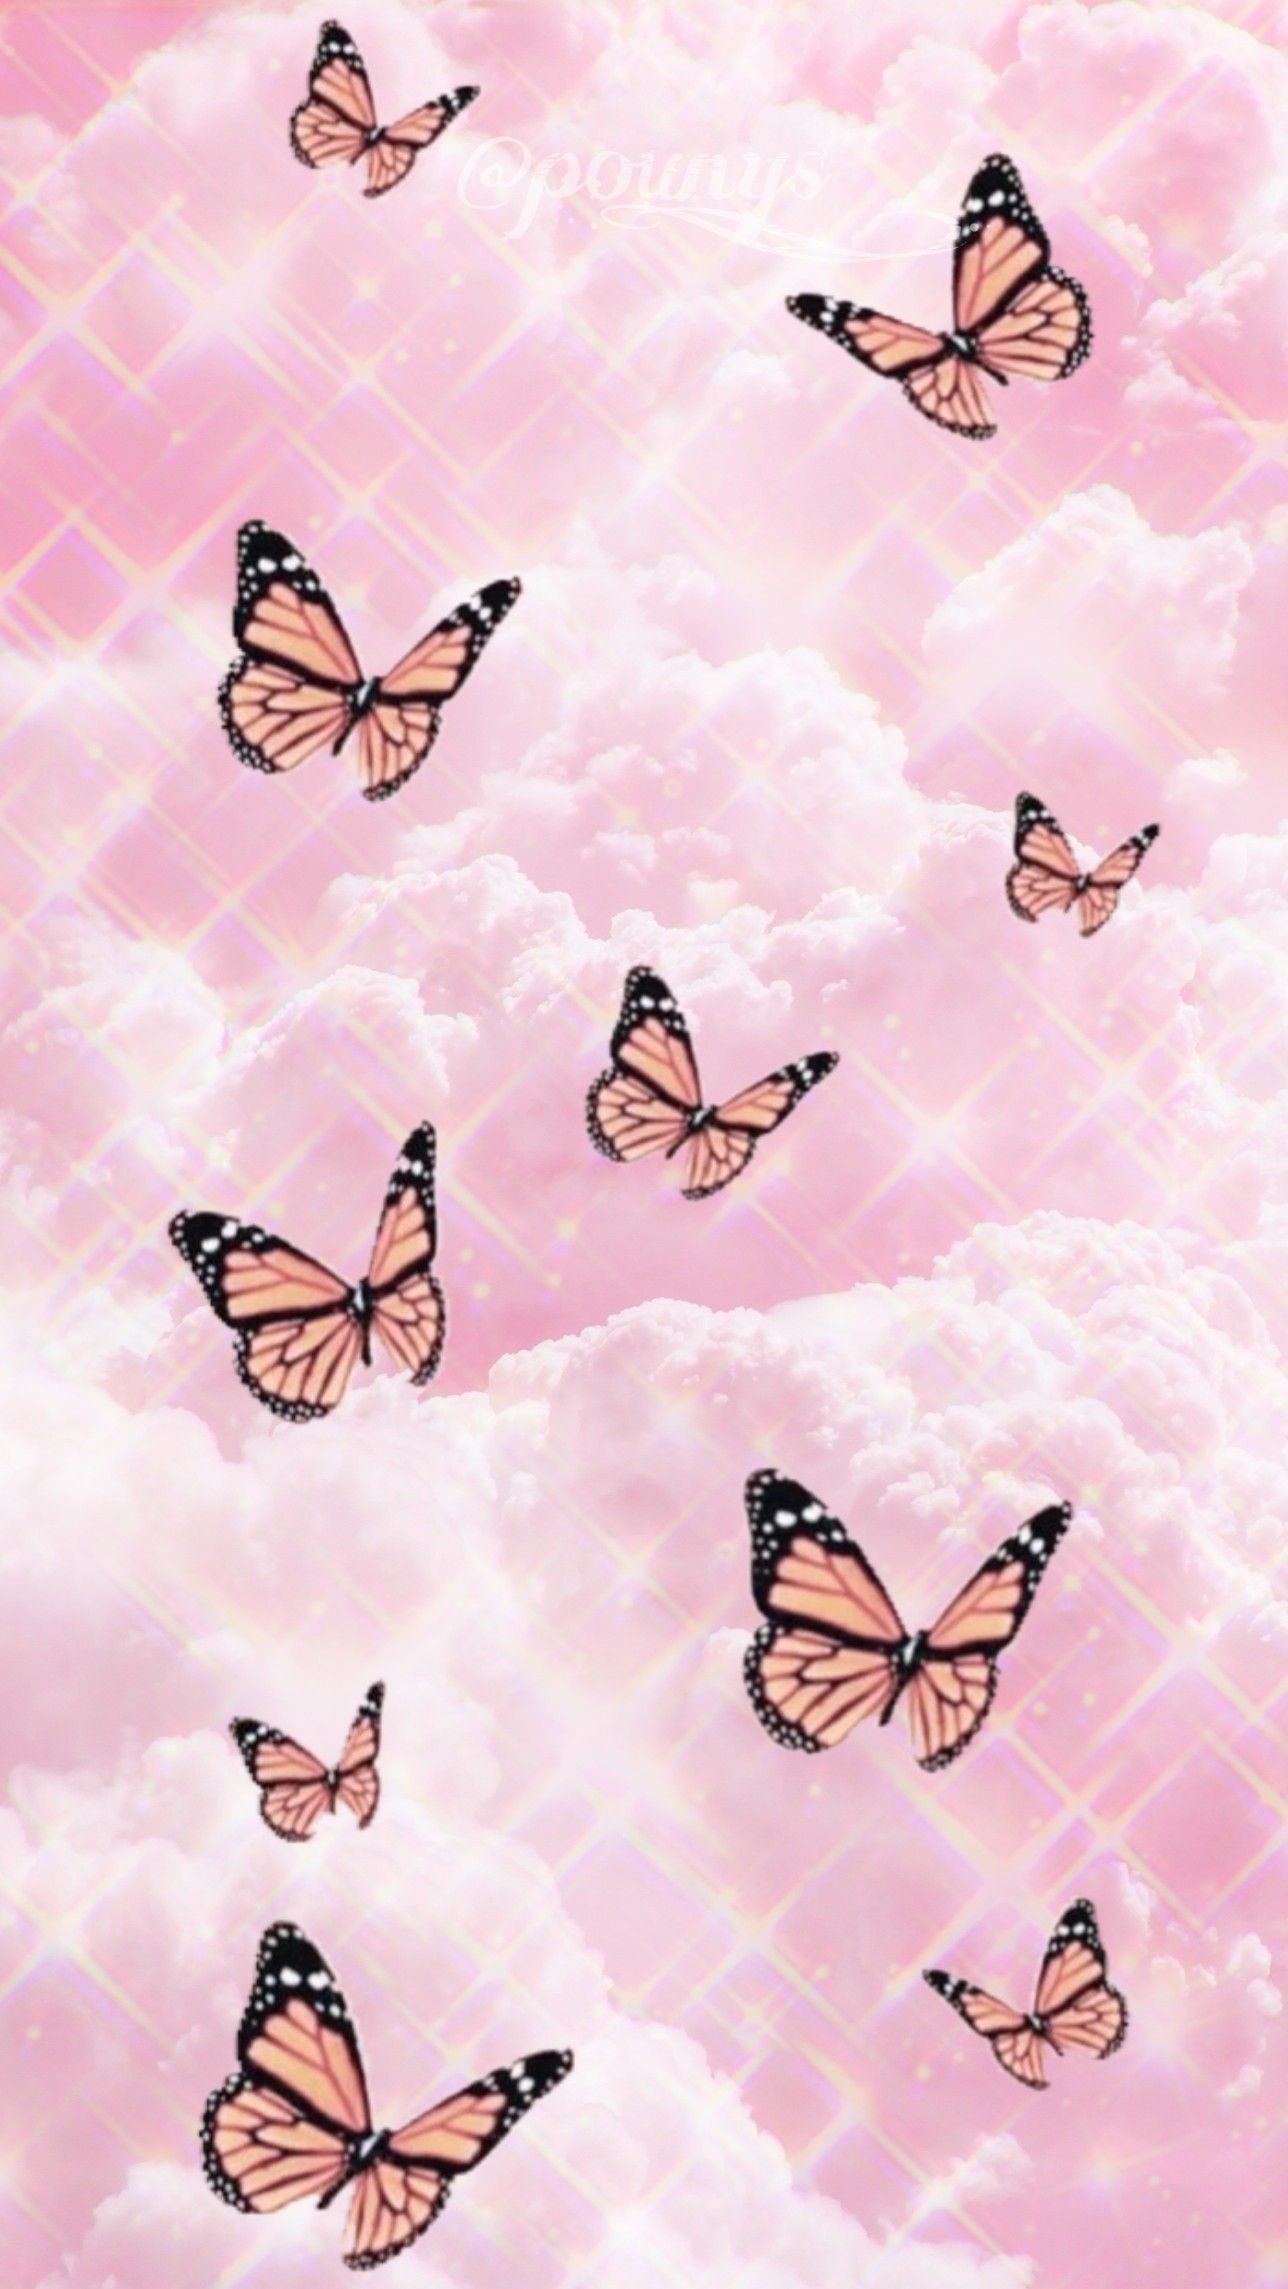 Butterfly iPhone Wallpapers on WallpaperDog